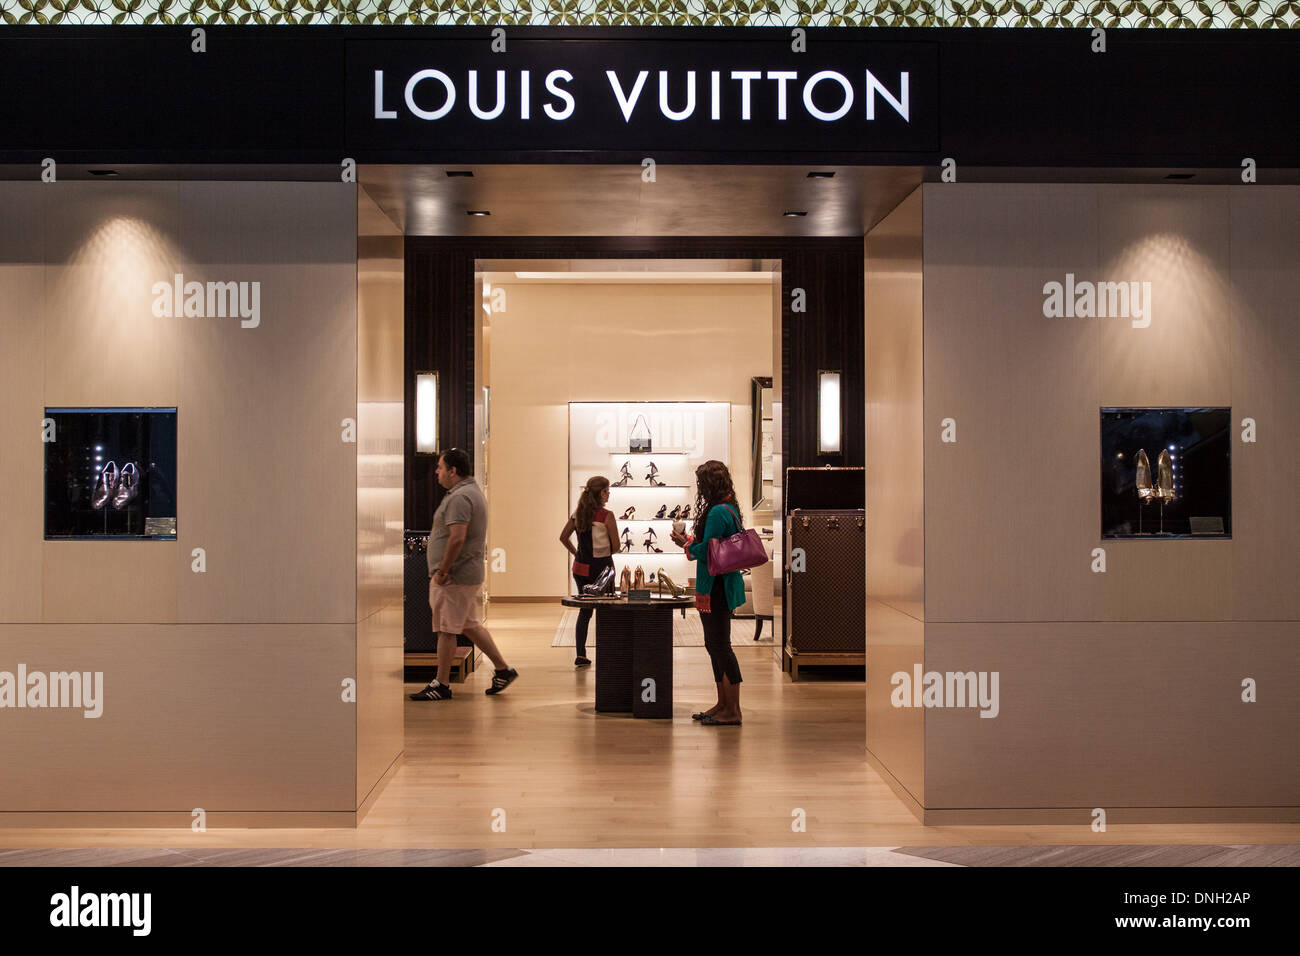 BUYERS SHOPPING IN THE LOUIS VUITTON BOUTIQUE IN THE SHOPPING